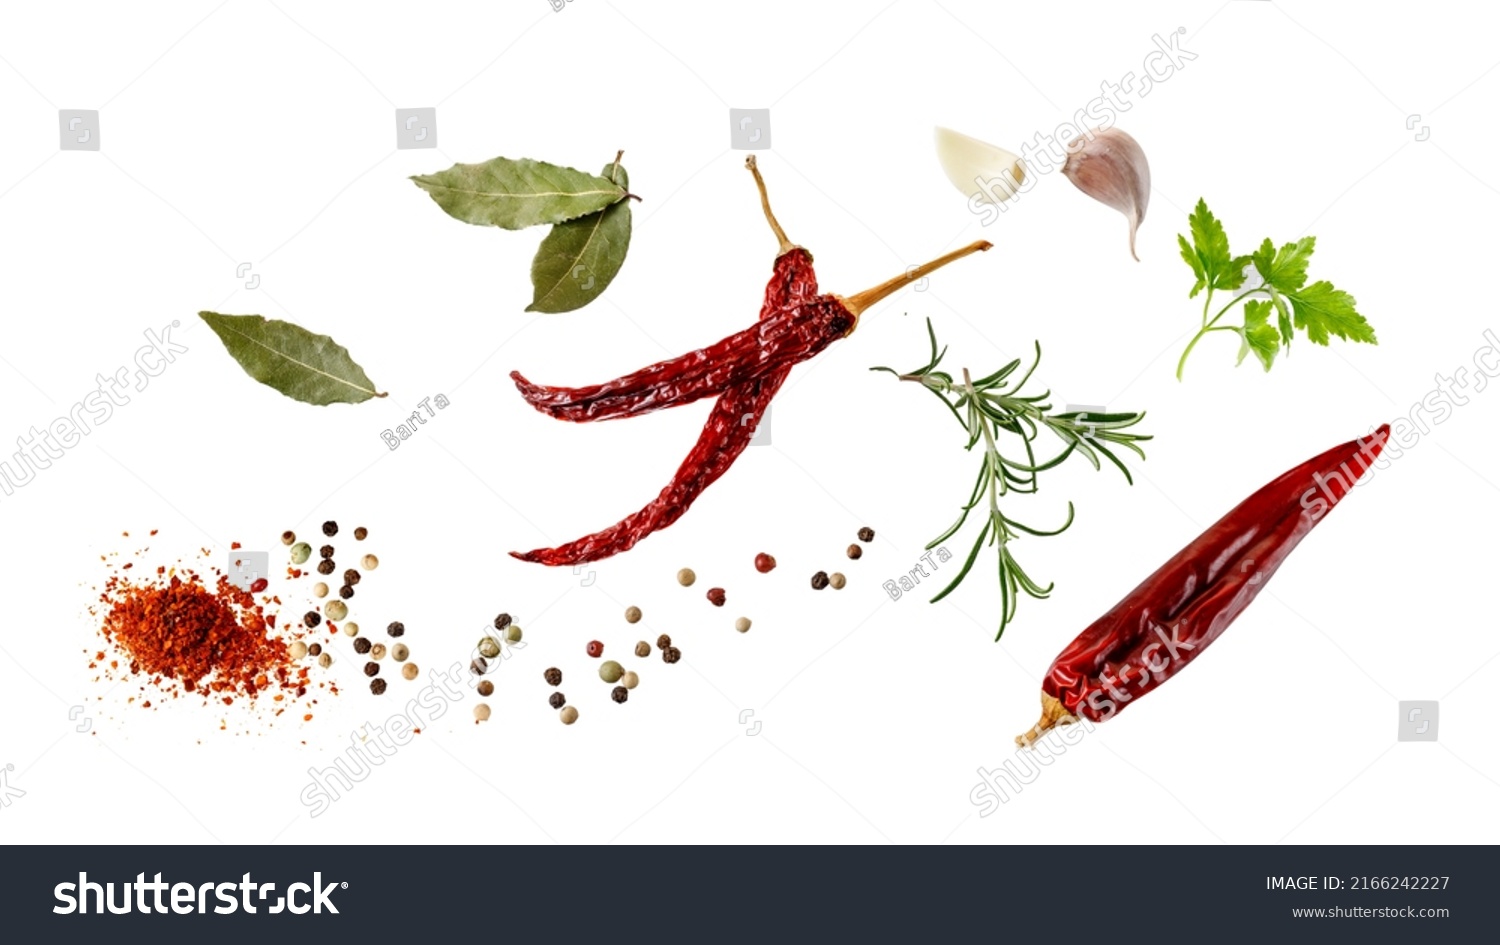 Aroma spice card: dried red hot chilli peppers, cloves garlic, mix peppercorn, bay leaves, rosemary and parsley fresh herb. Aromatic spicy ingredients for cuisine isolated on white background #2166242227